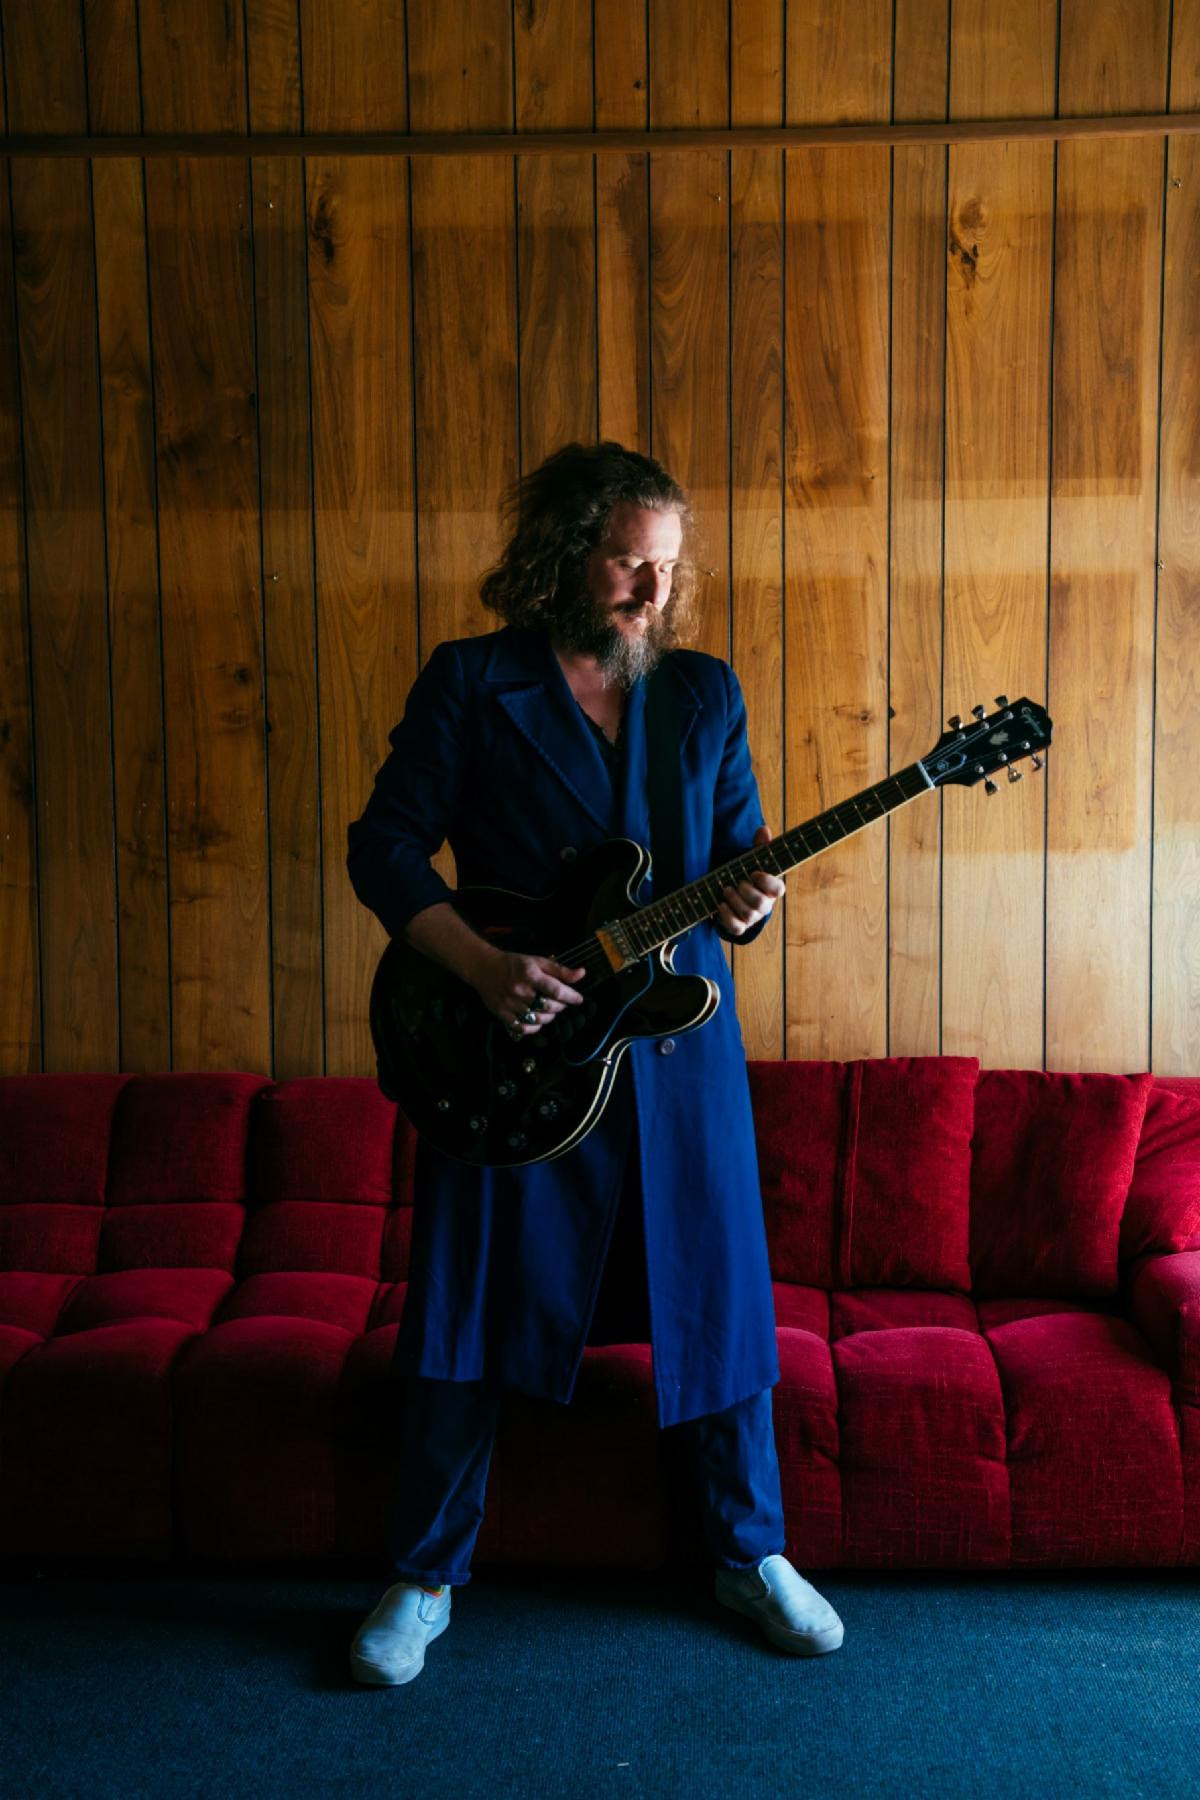 Above: Jim James pictured with his new Epiphone ES-335